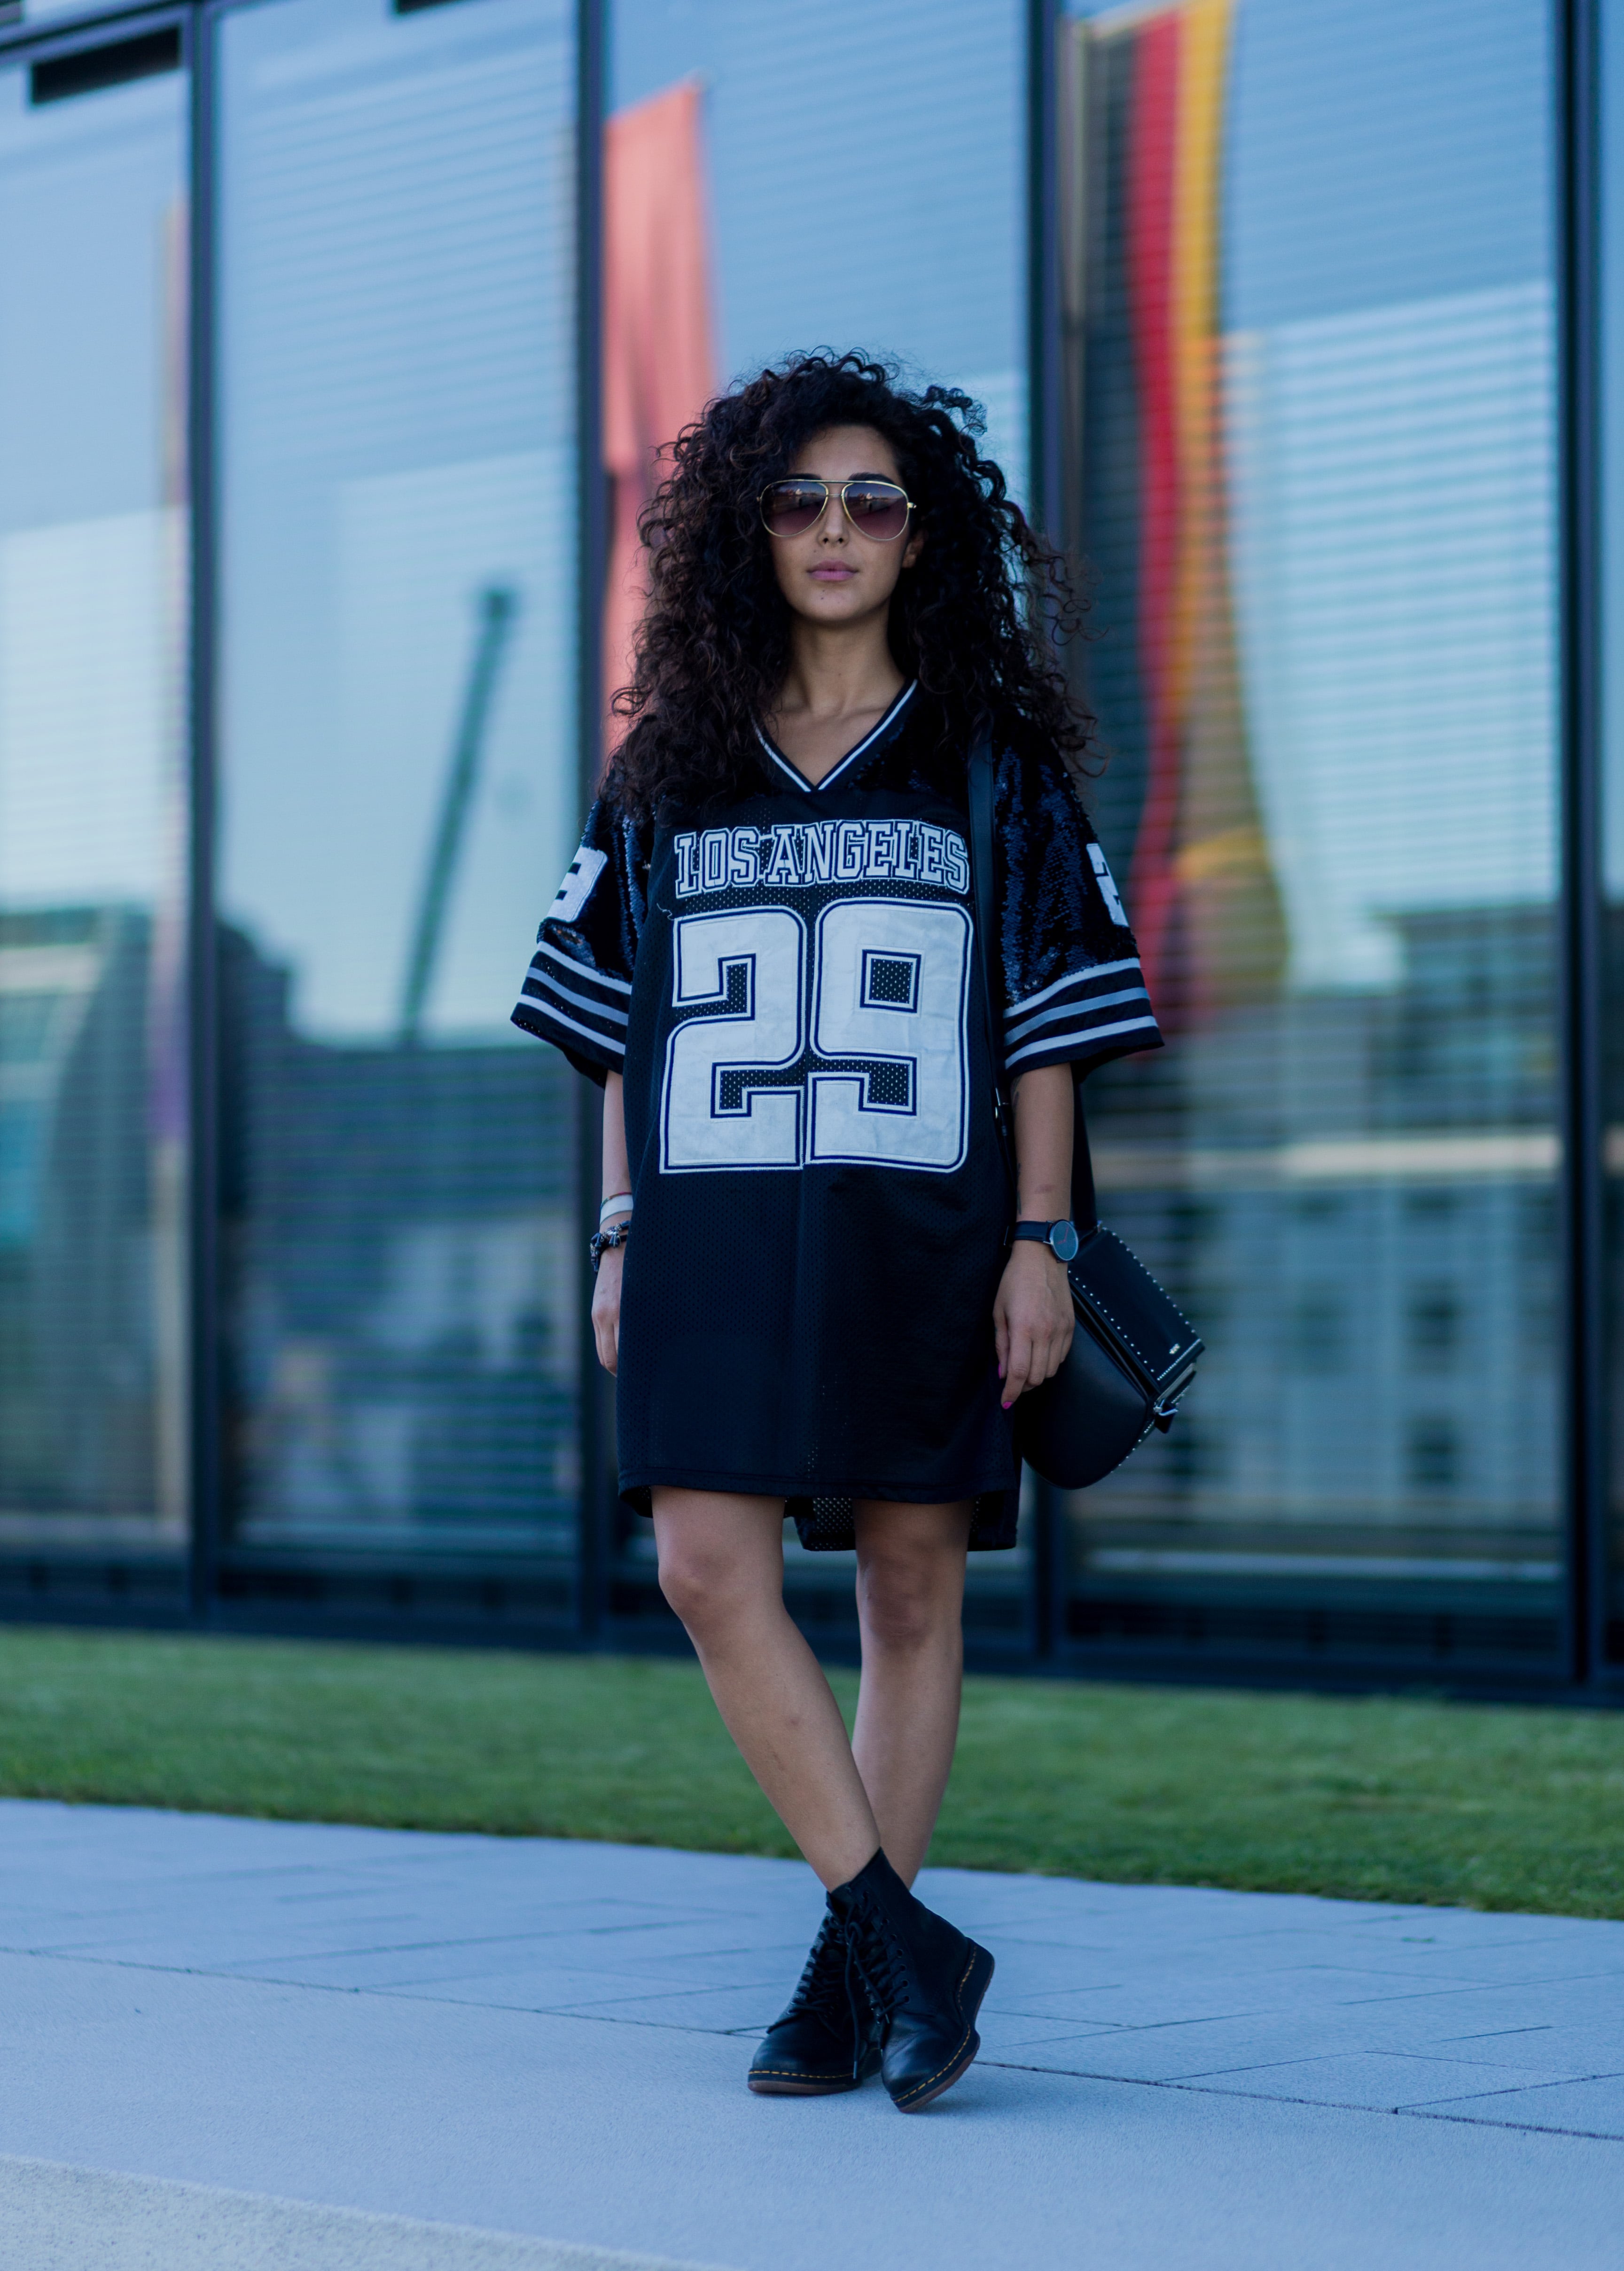 21 Adorable Outfits to Make You Look Chic in a Hockey Game